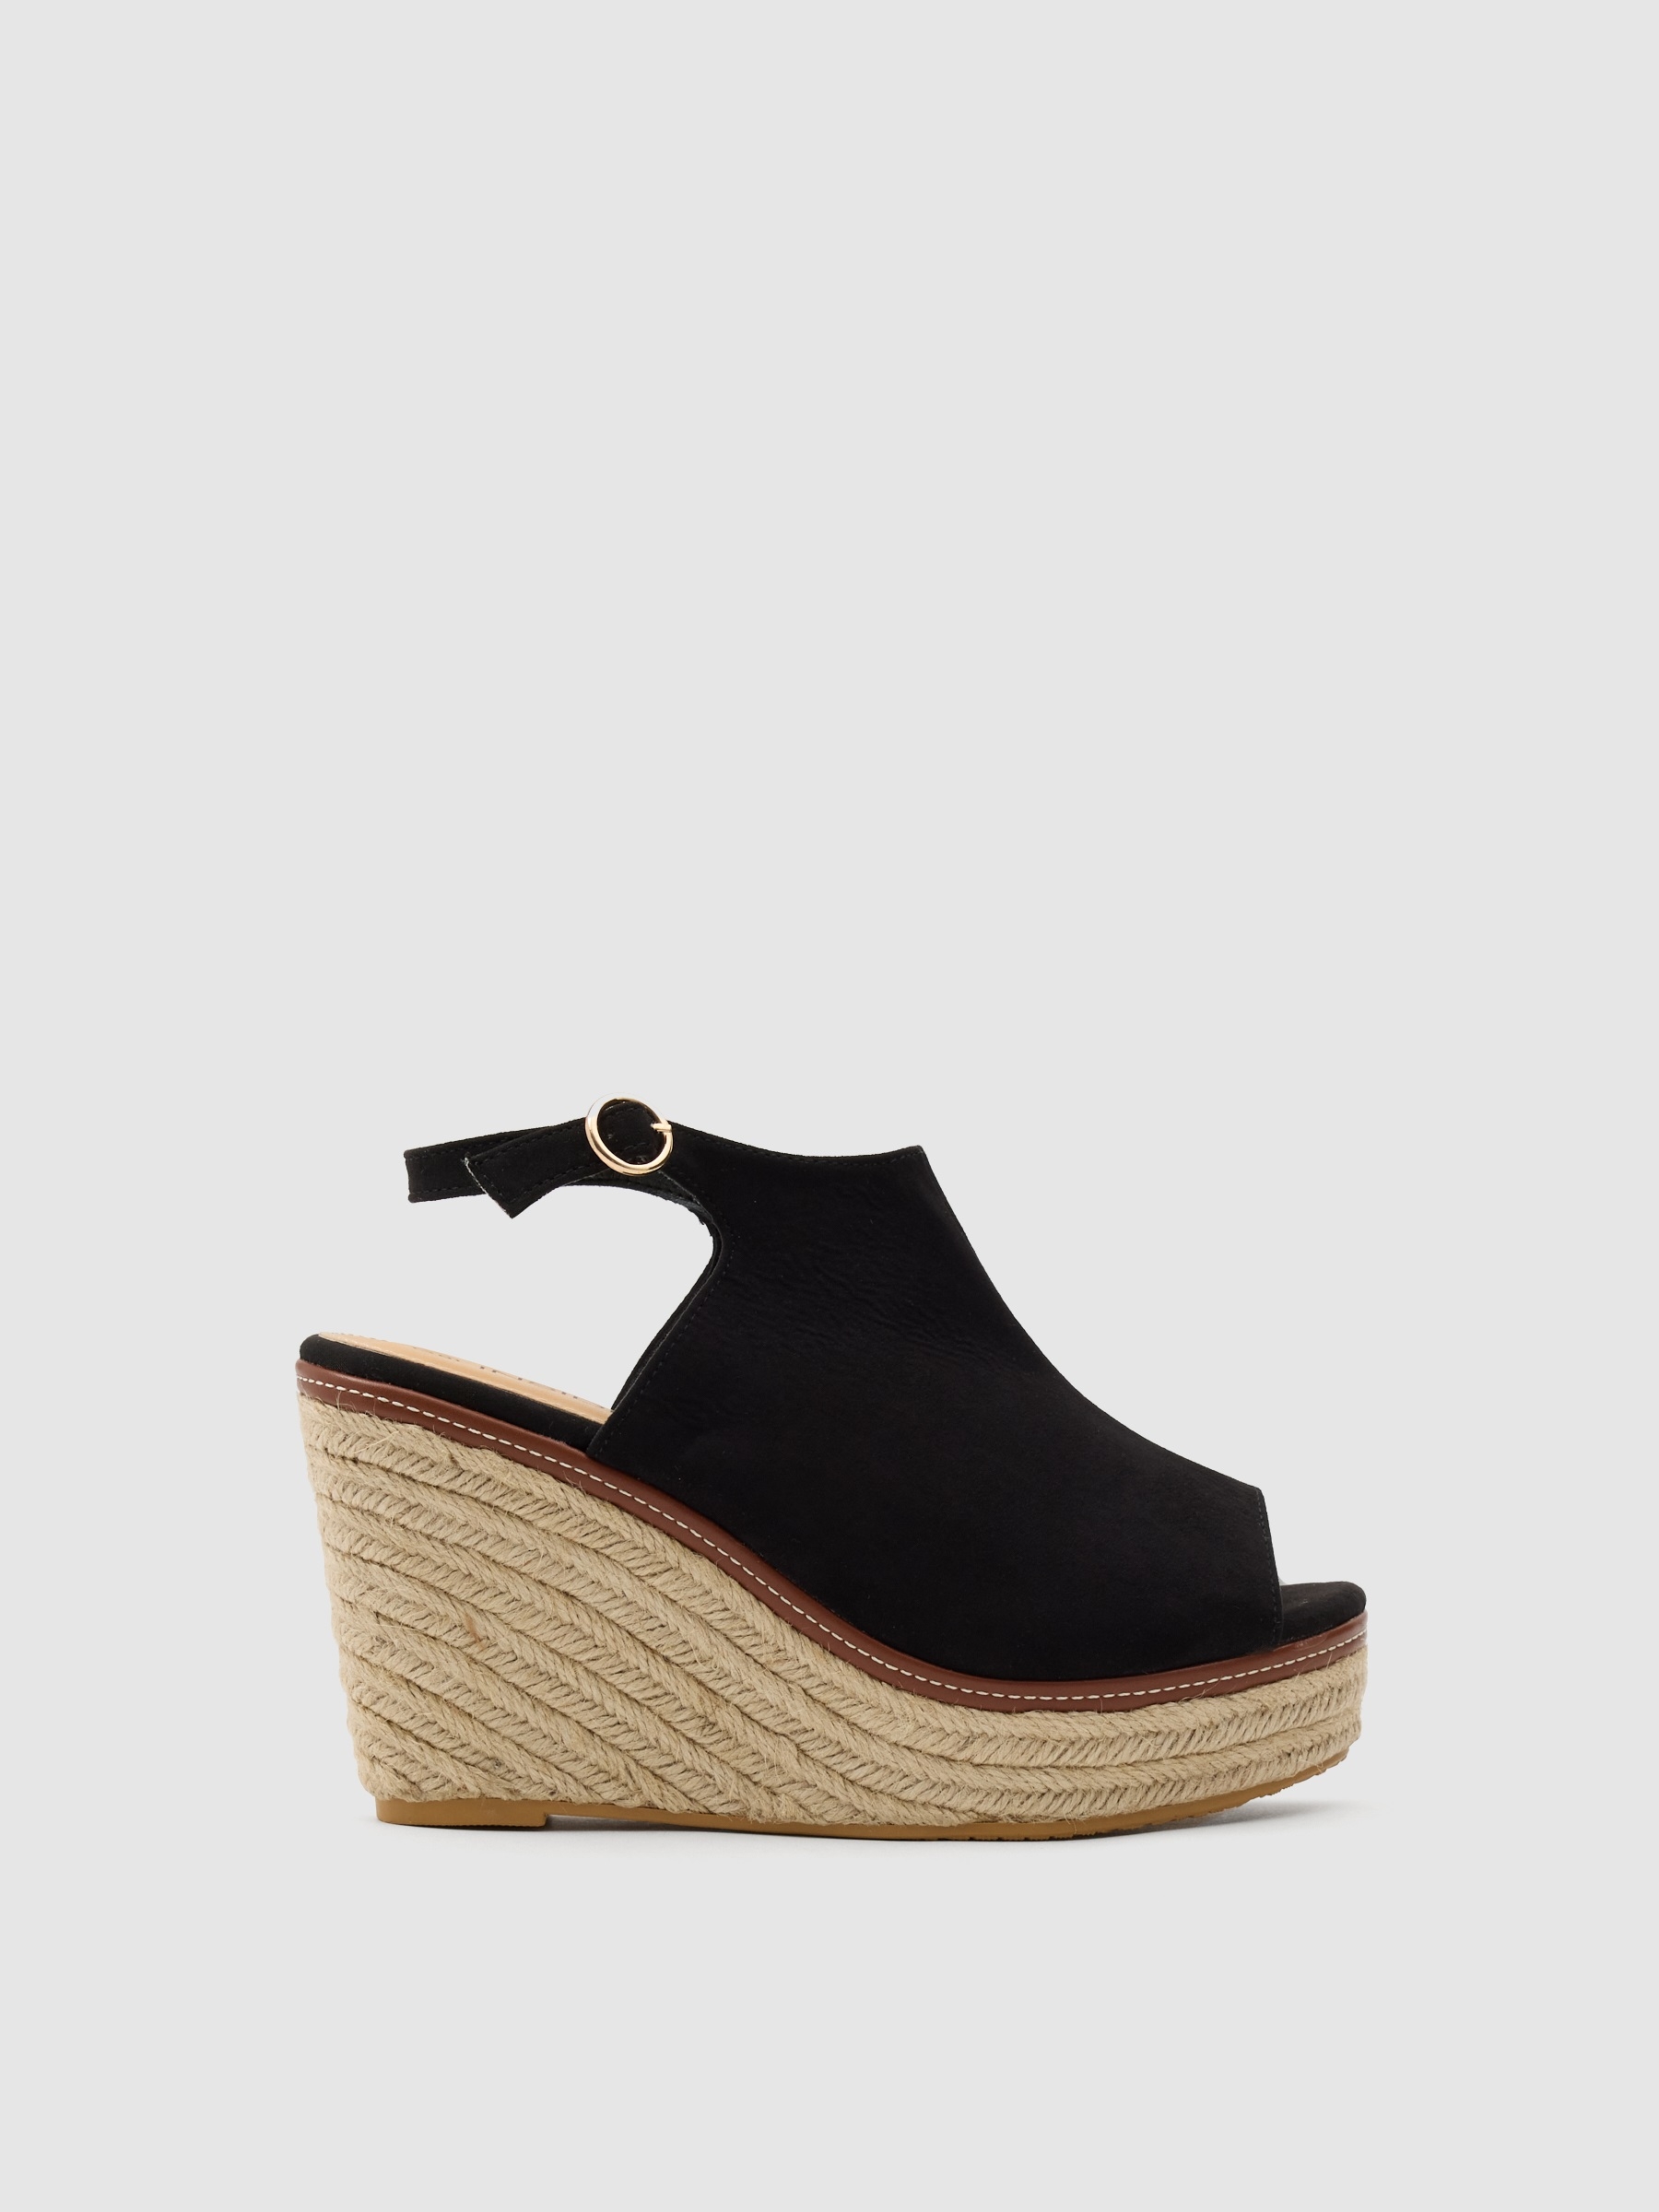 Women's Wedges, Wedge Shoes